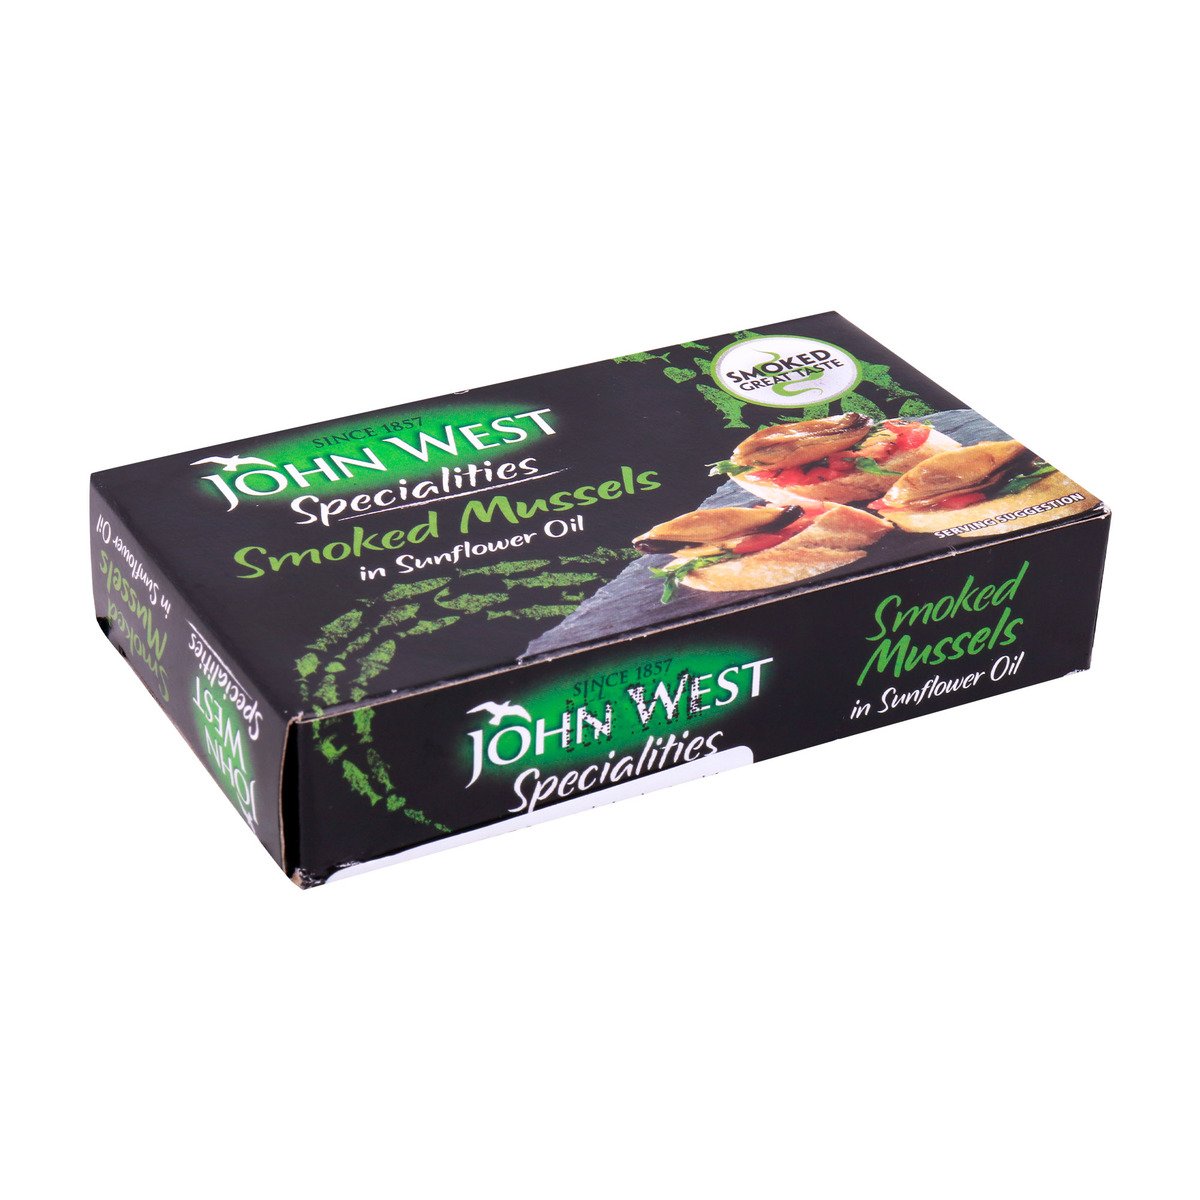 John West Smoked Mussels In Sunflower Oil 85 g